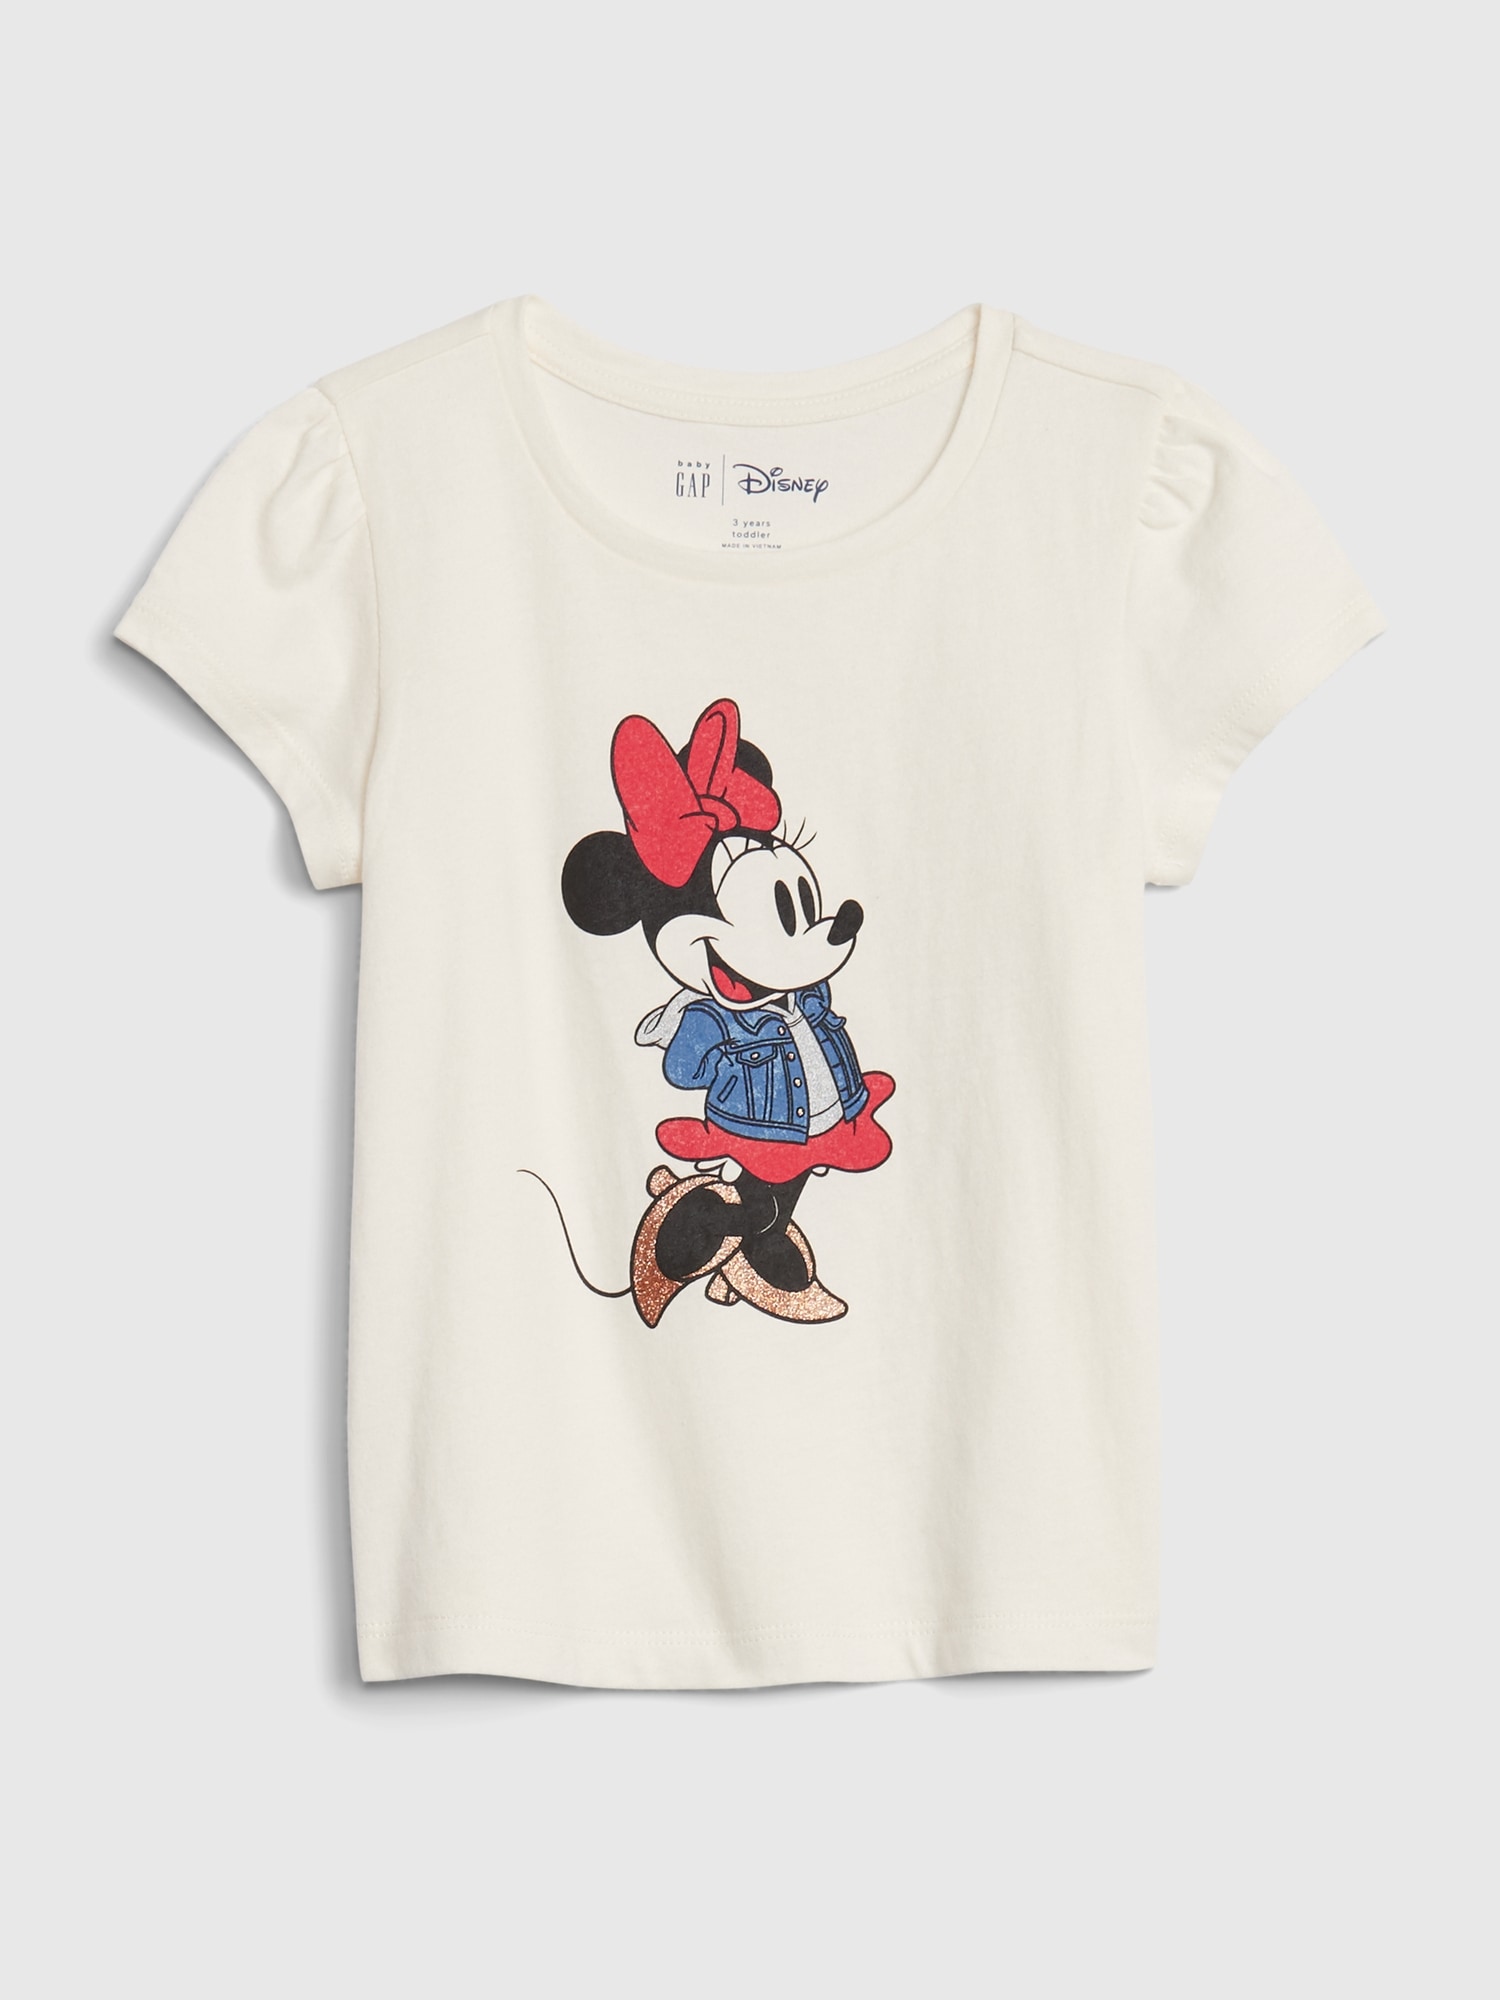 Disney Juniors' Girls' Red Minnie Mouse 'Love And Be Kind' T-Shirt Size XL